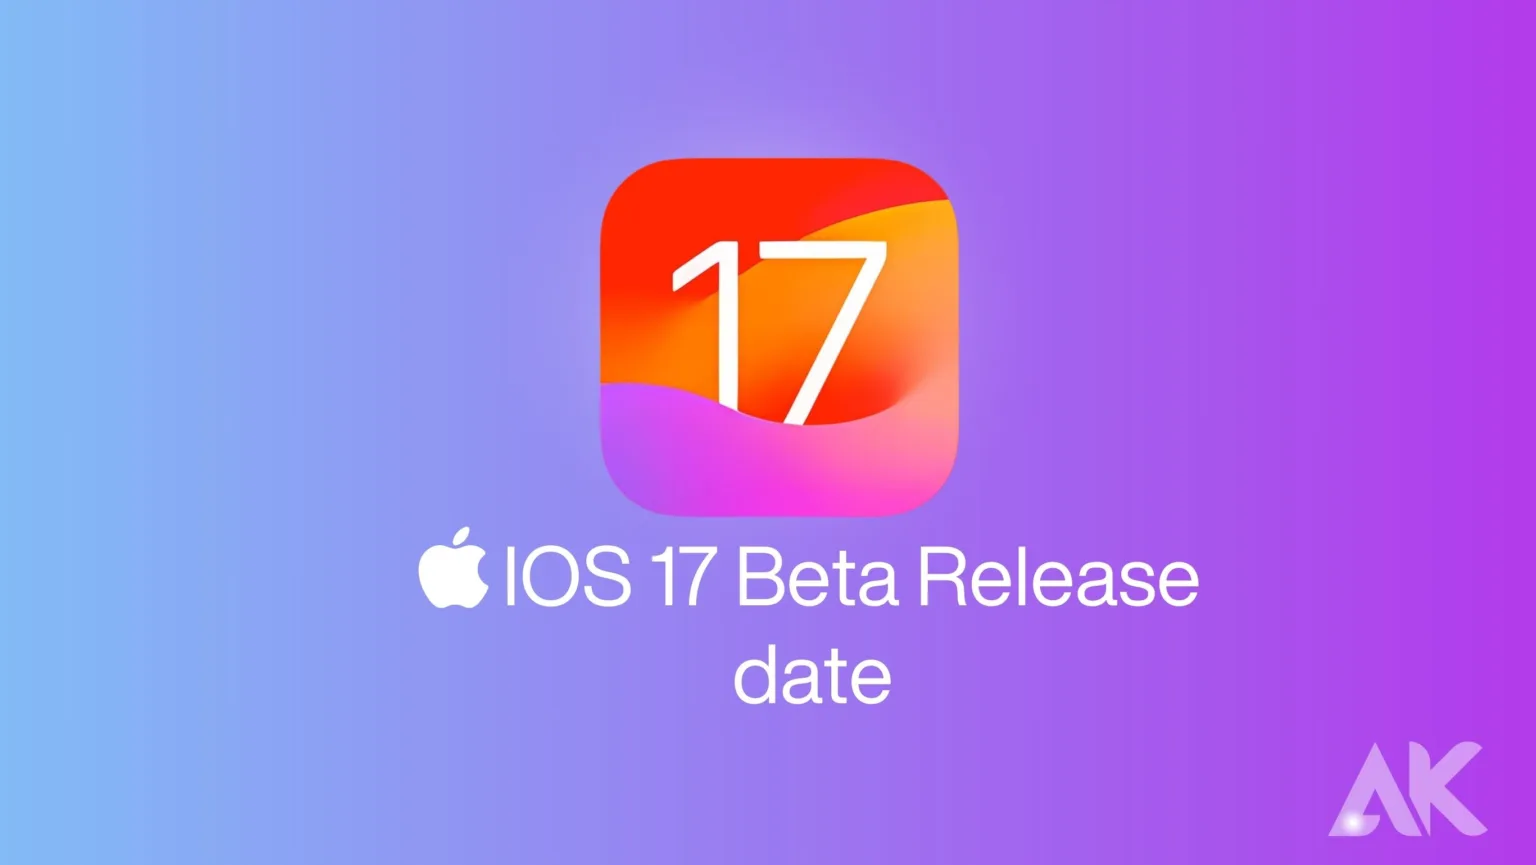 Apple IOS 17 Beta Release date - Complete Guide